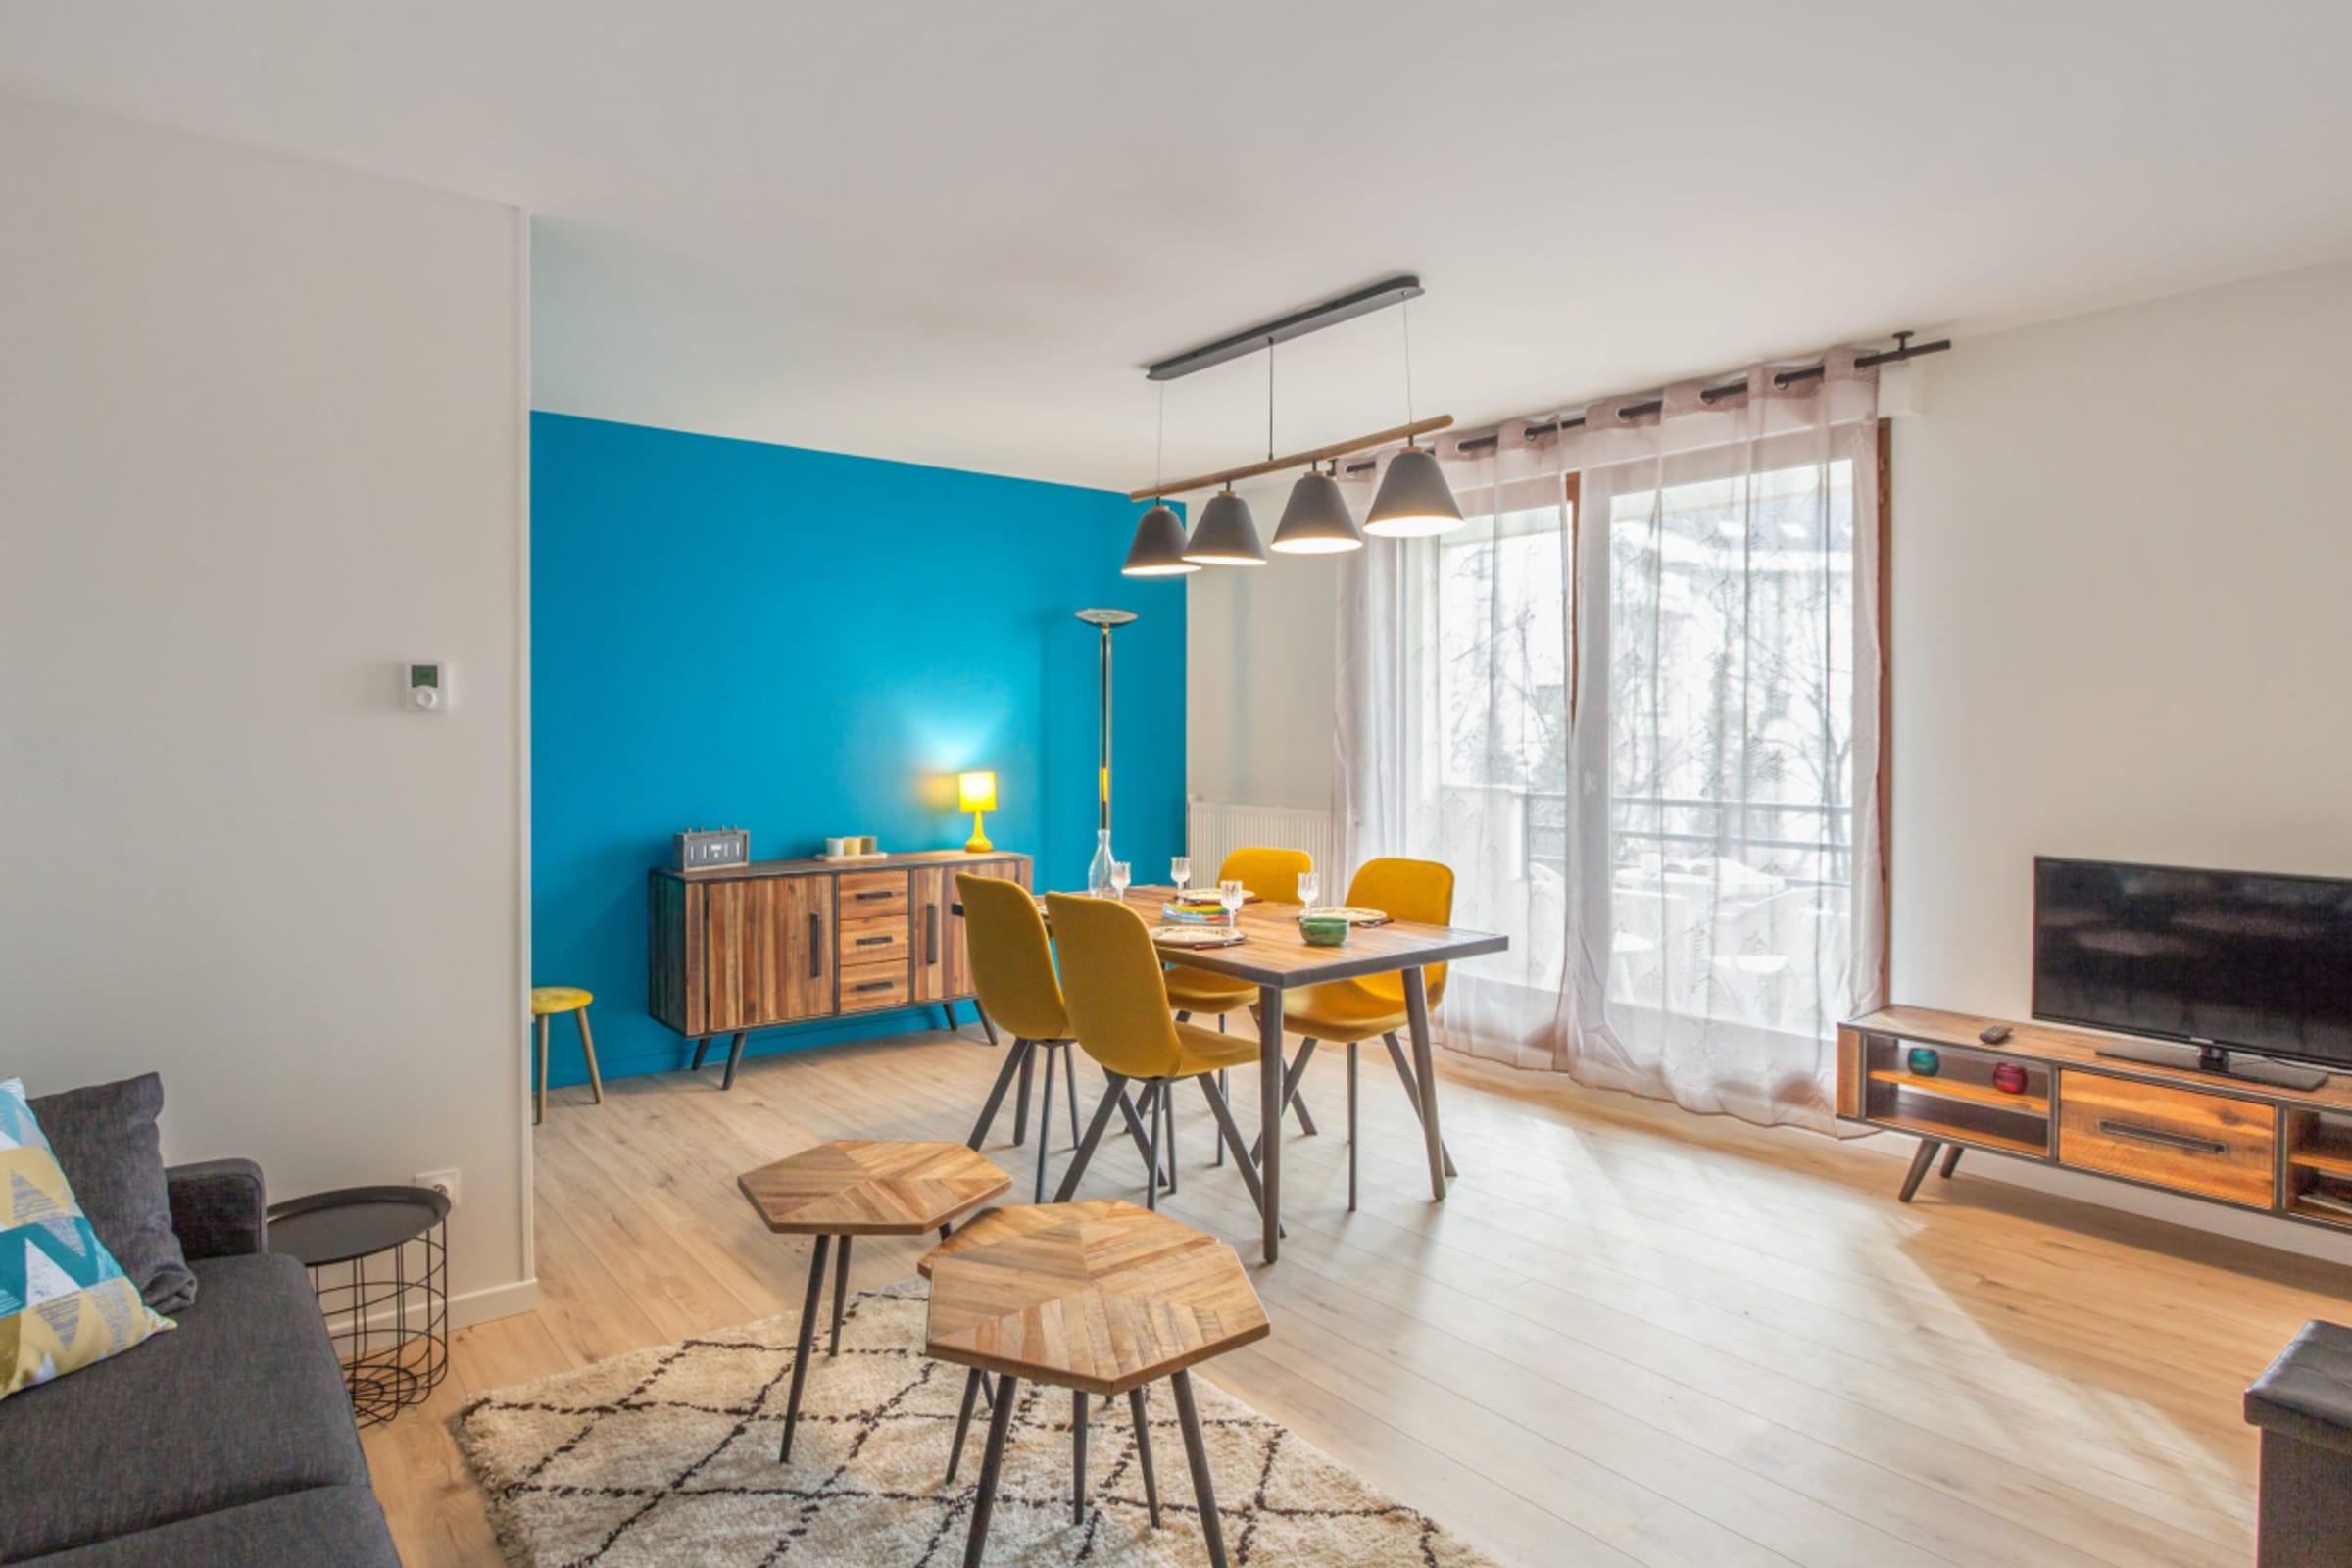 Property Image 1 - Vibrant Apartment with Large Windows near City Center